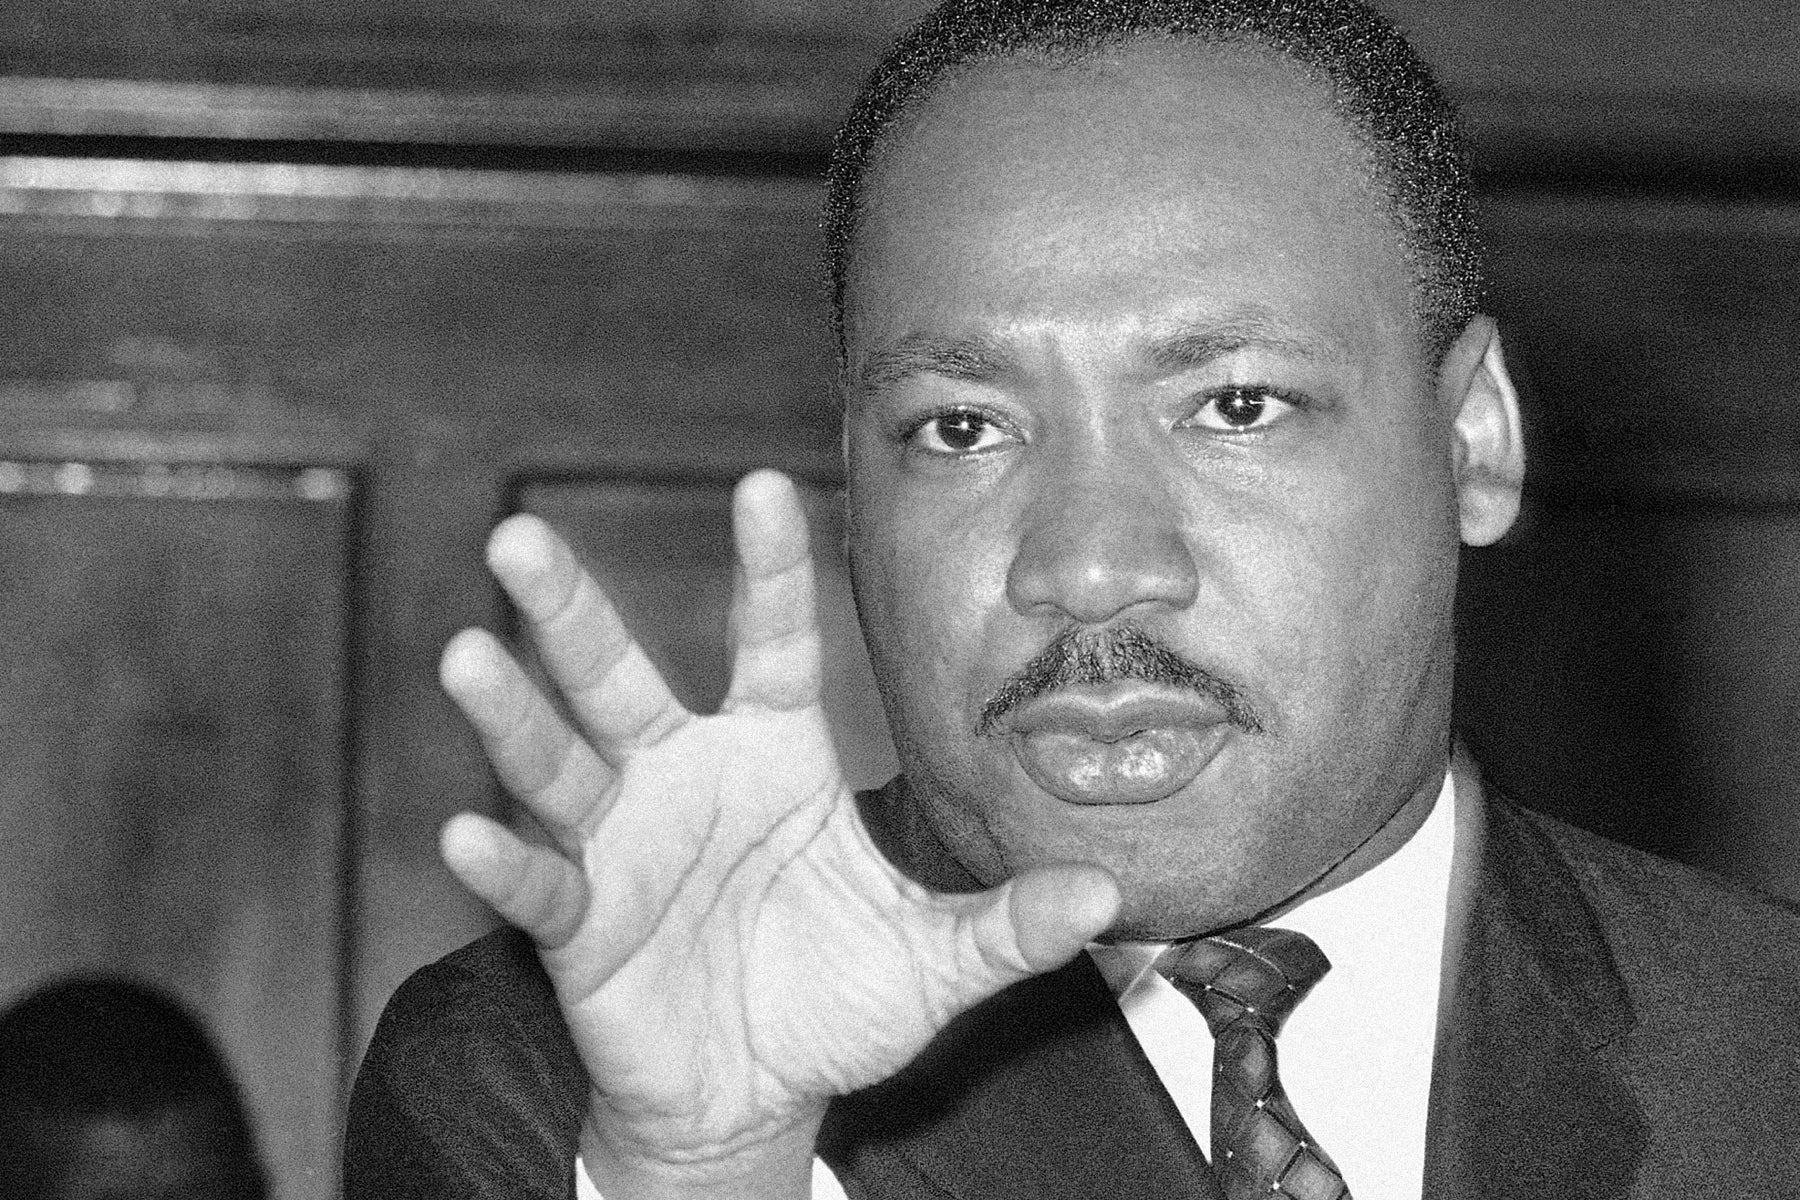 Martin Luther King, Jr., What Is Your Life's Blueprint? 